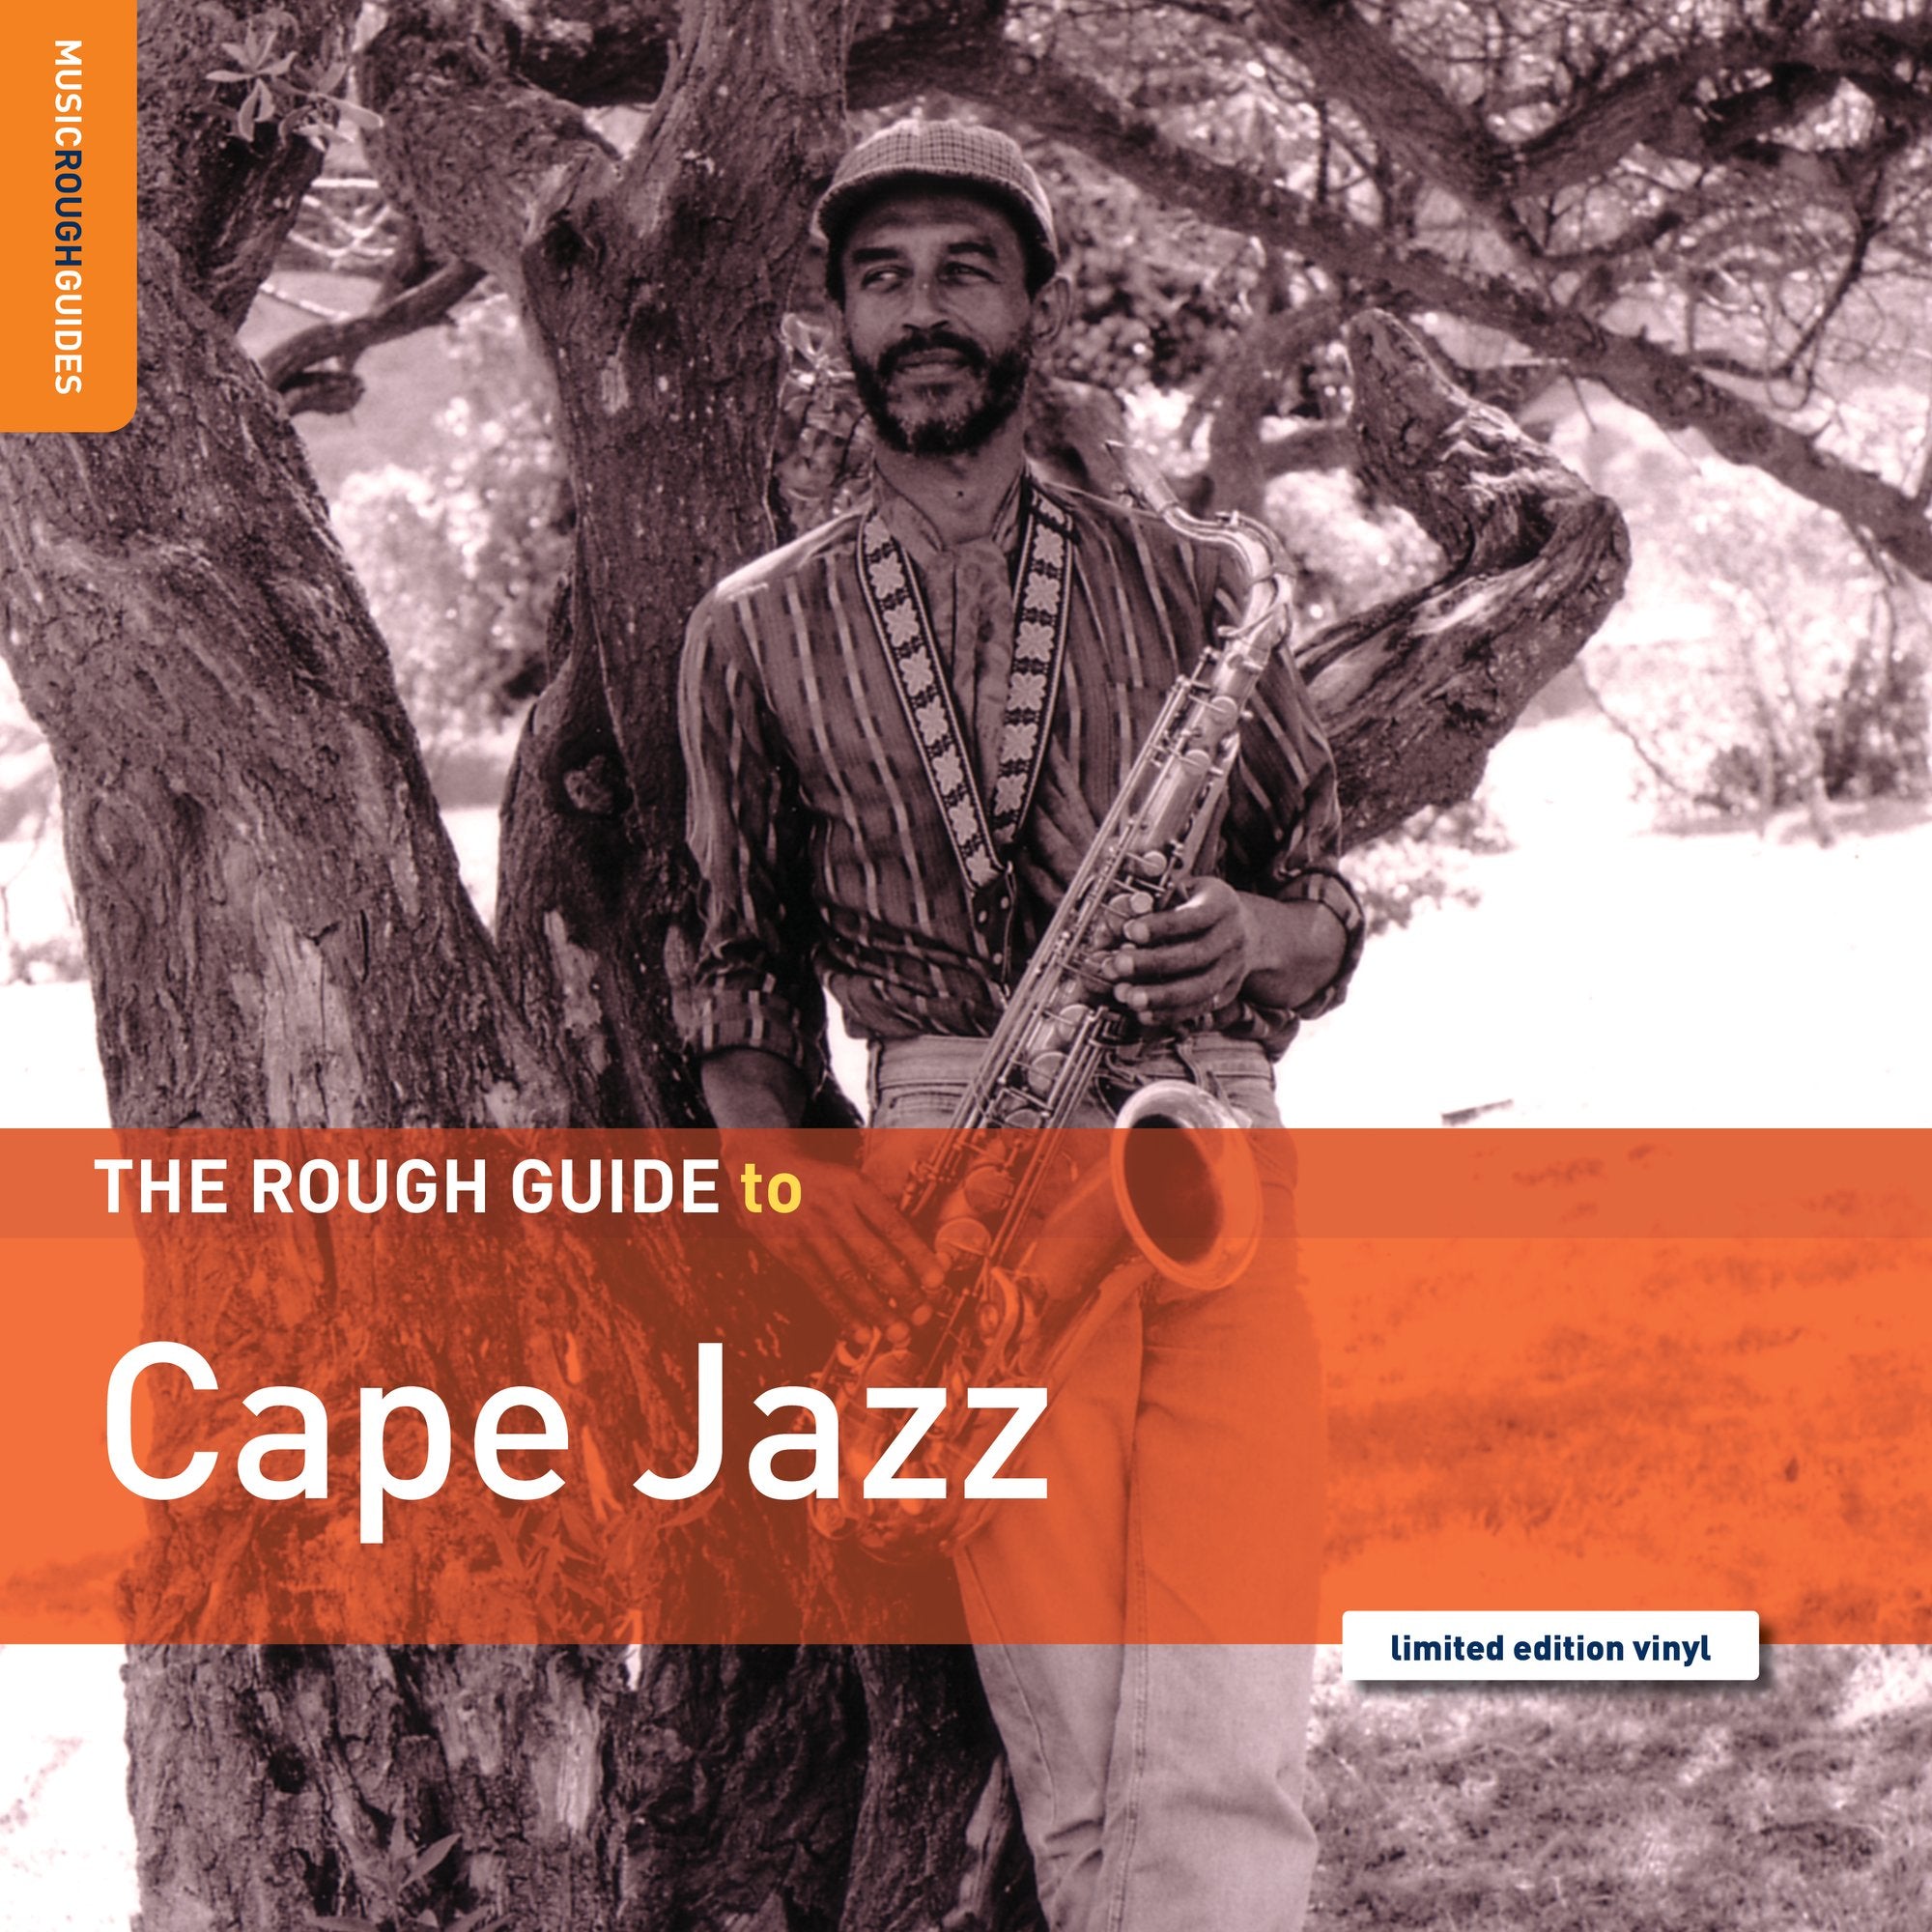 VARIOUS - The Rough Guide To Cape Jazz - LP - Limited Vinyl